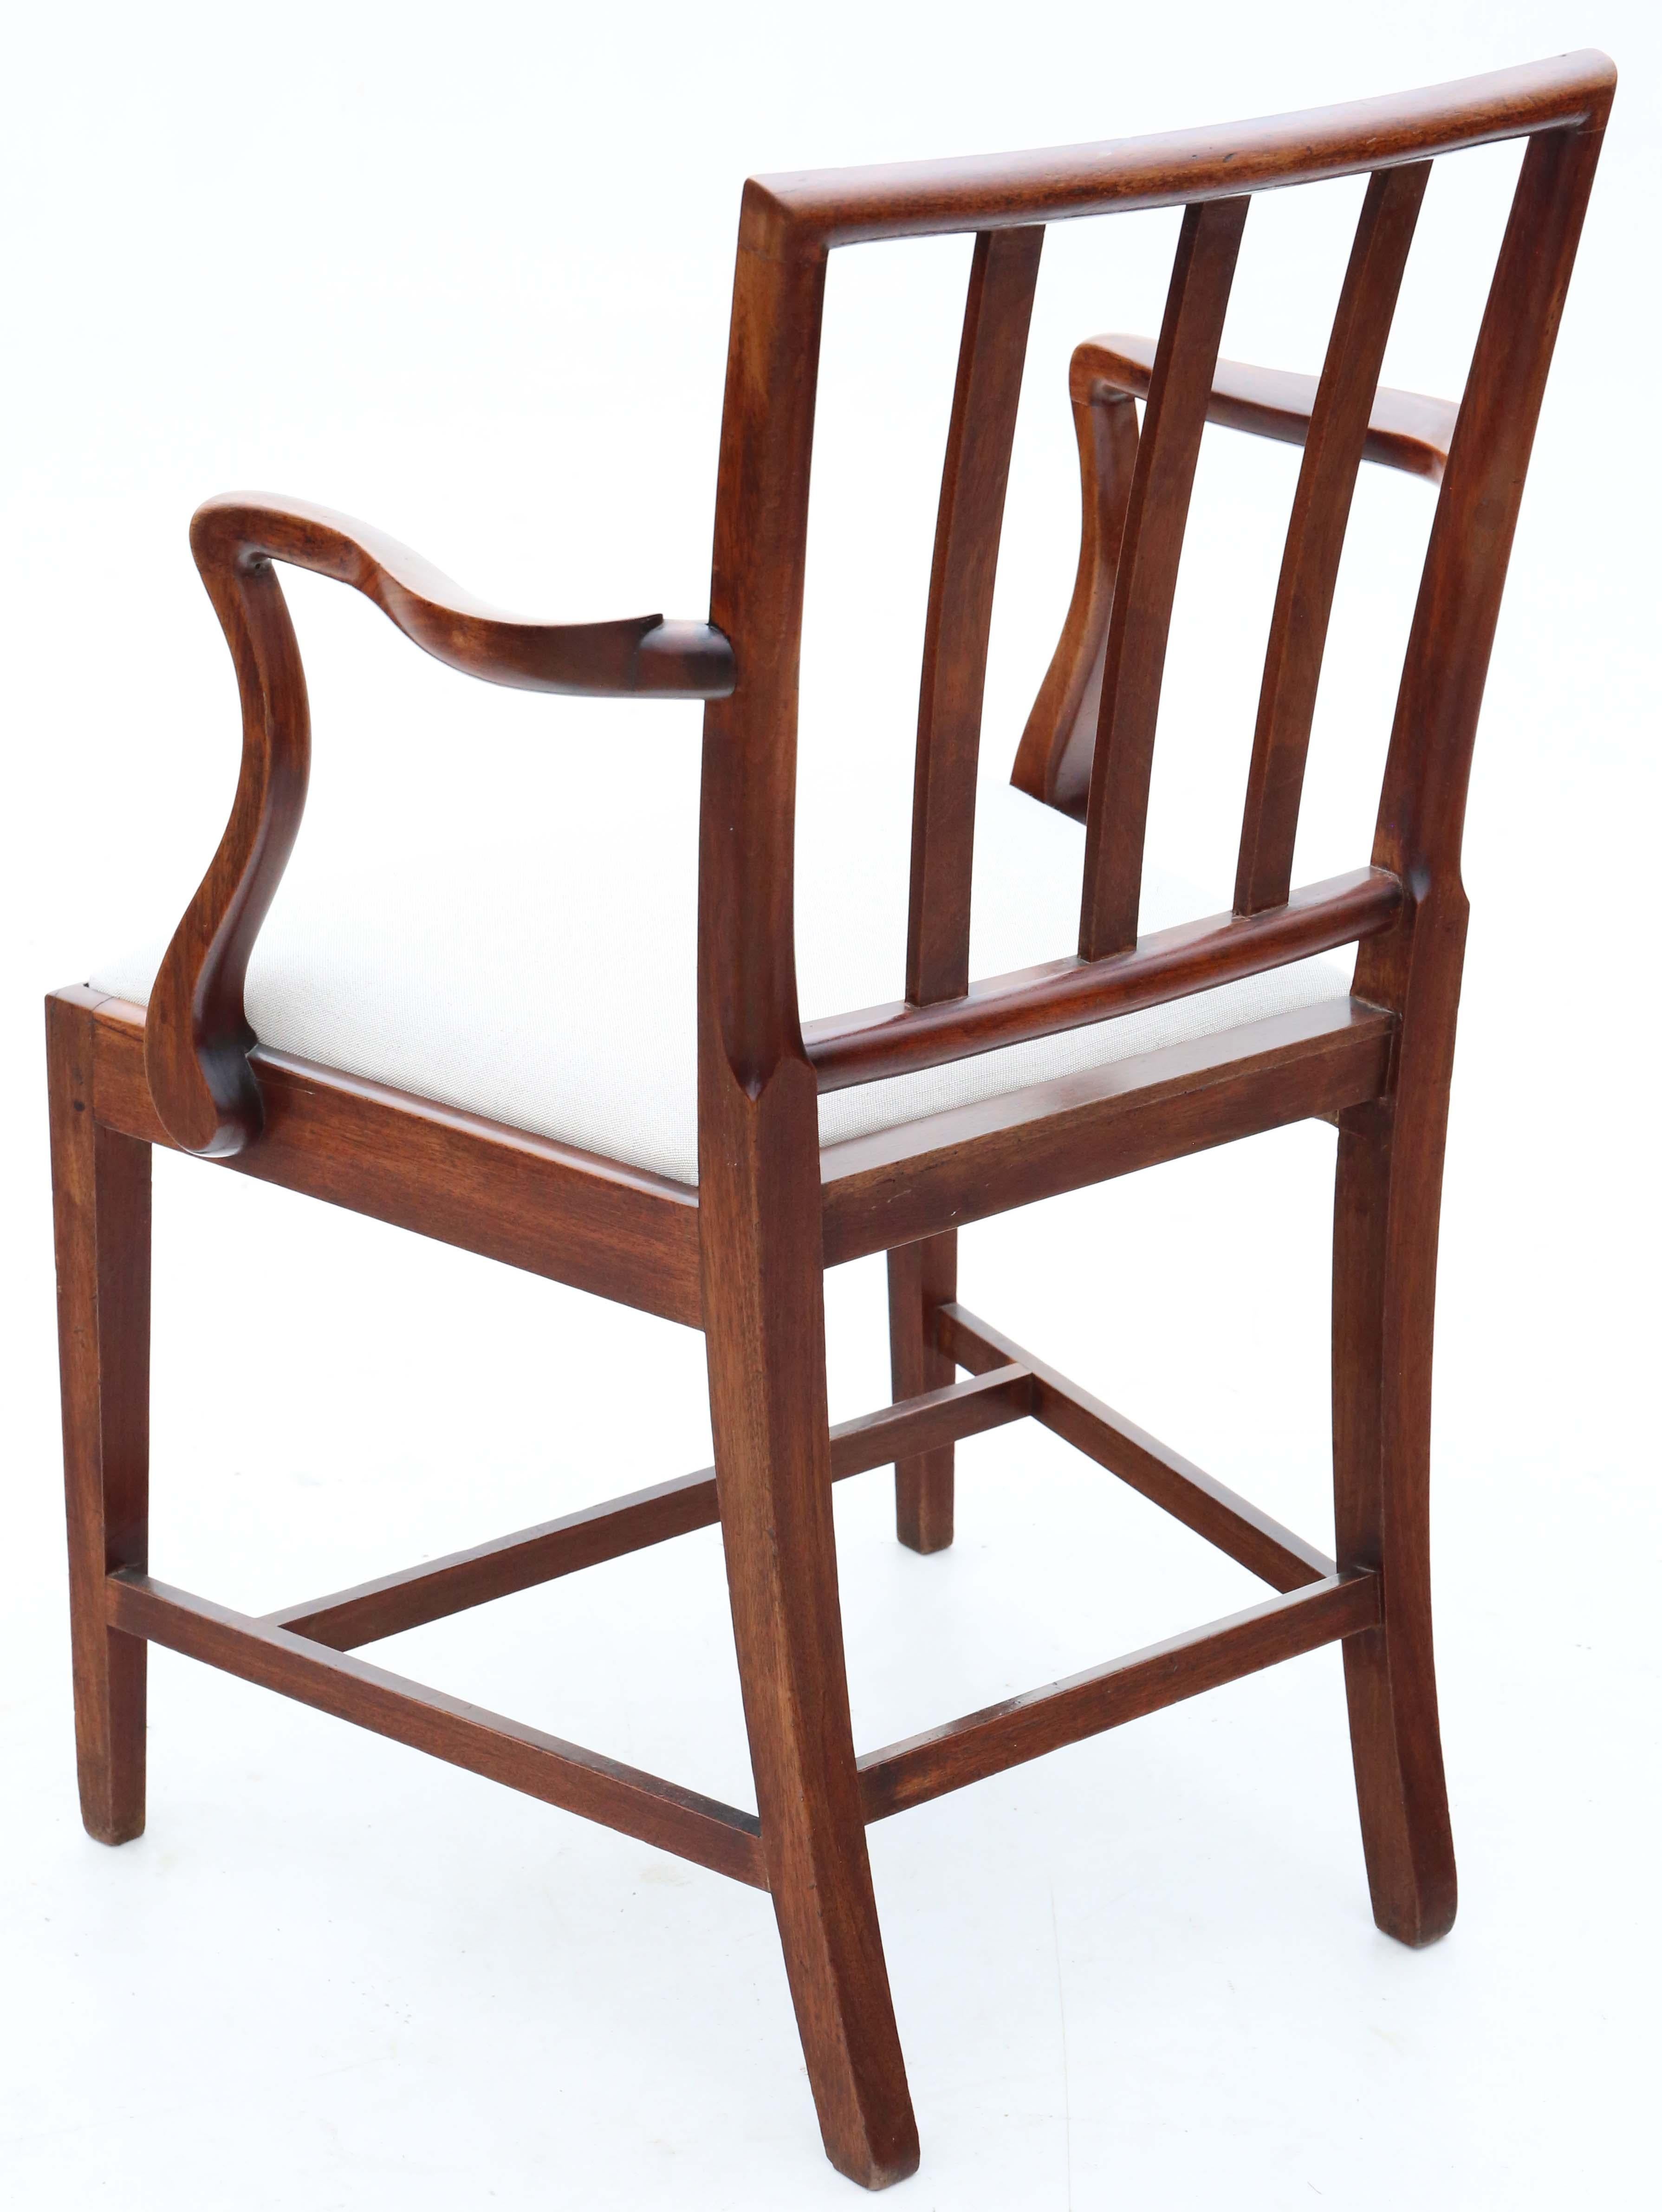 Regency Mahogany Dining Chairs: Set of 8 (6+2), Antique Quality, Early 19th C For Sale 1